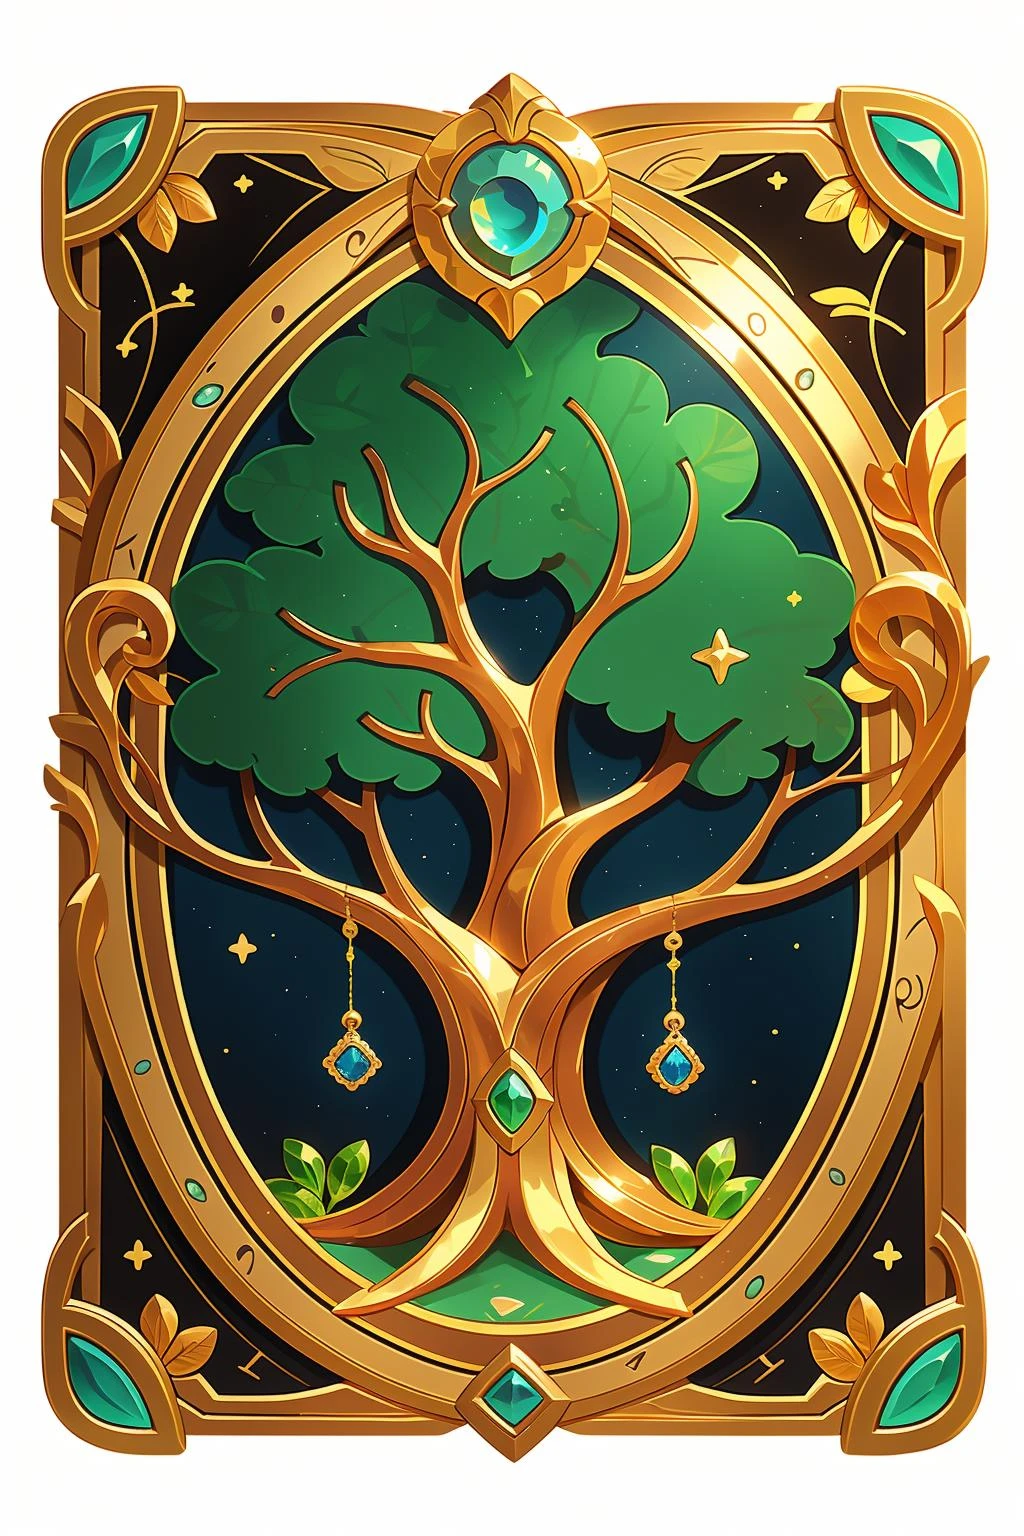 concept art, game cards, European pattern, gold relief, relief, no man, gemstone, tree pattern, still life, tarot cards, border, simple background,